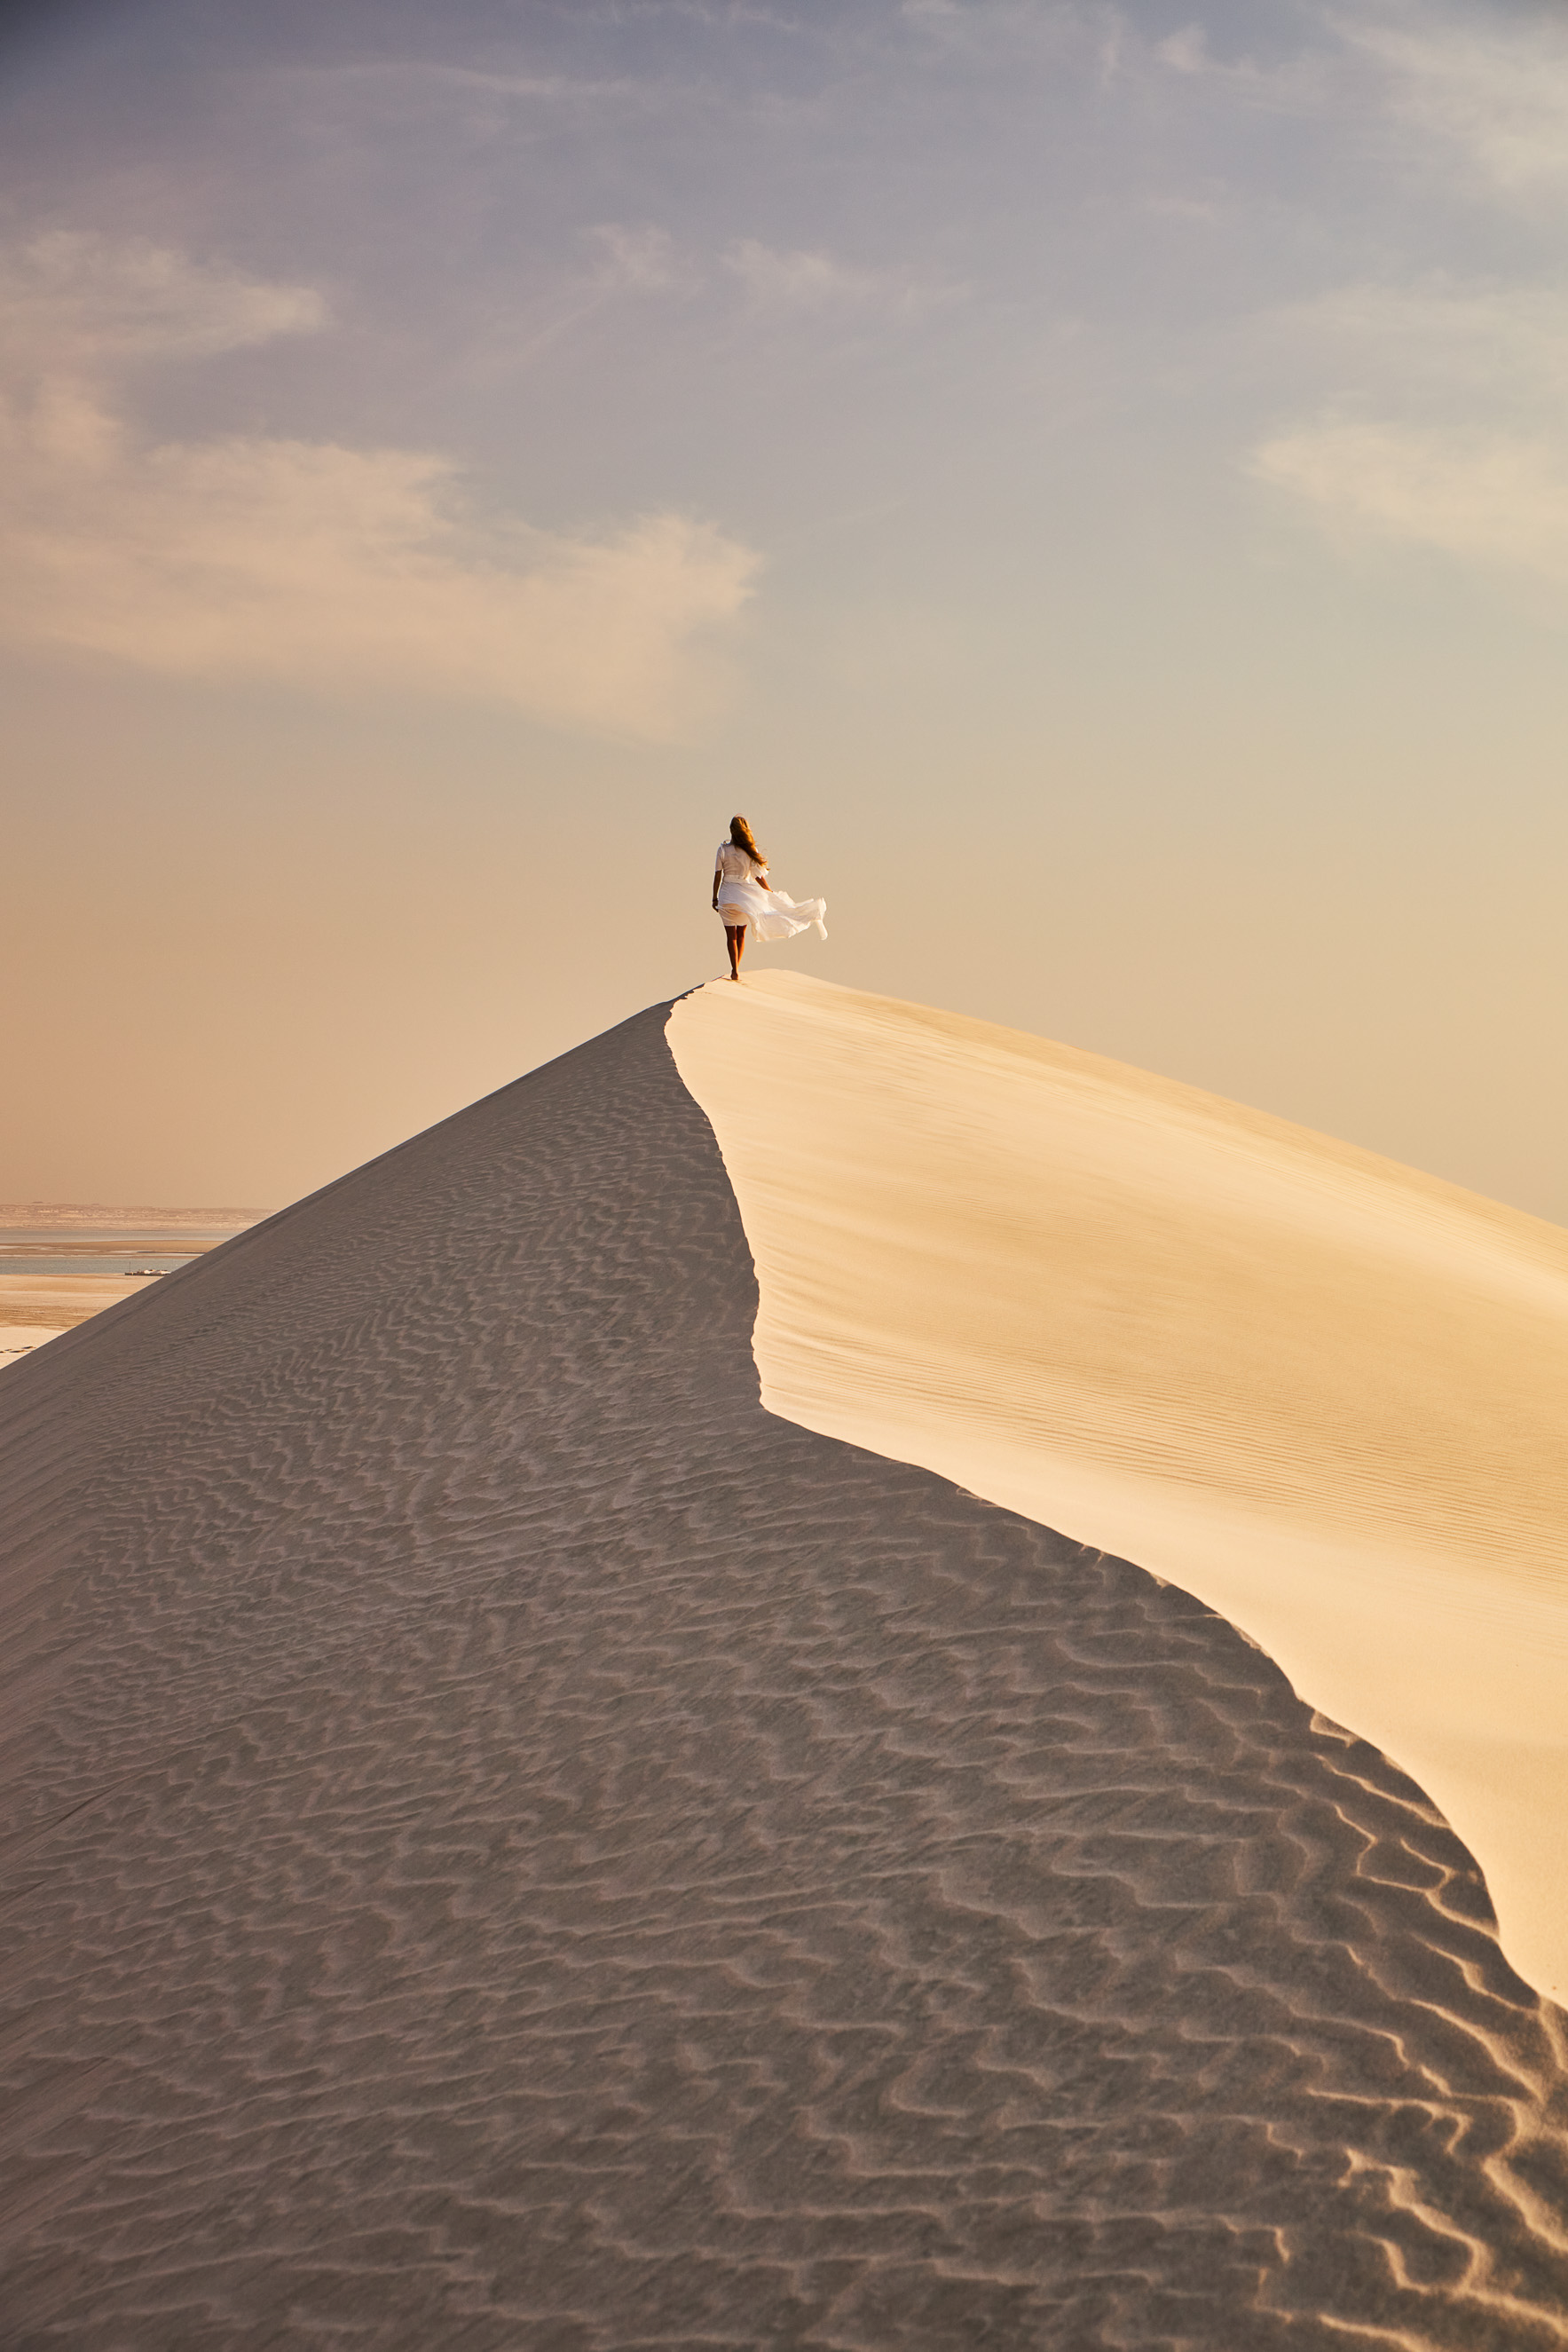 A person with long hair has their back to the camera as they walk along the crest of a sand dune. To their left, the dune is in shadow. Their dress blows in the wind. It is day time. A few thin clouds dot the sky.